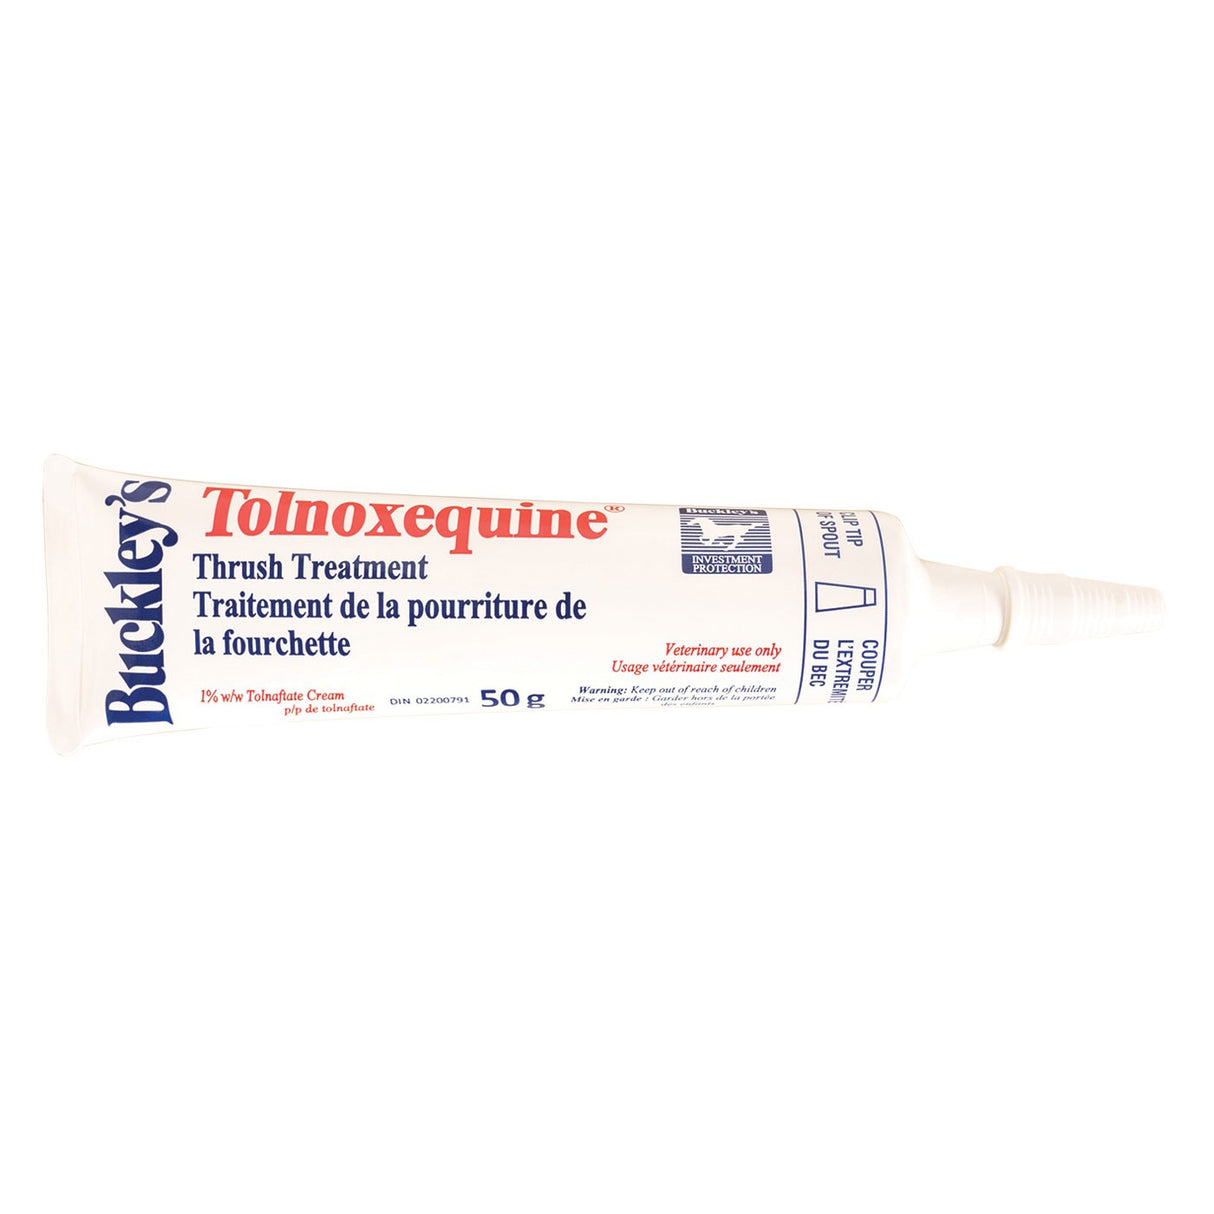 Buckley's Tolnoxequine Thrush Ointment 50 g